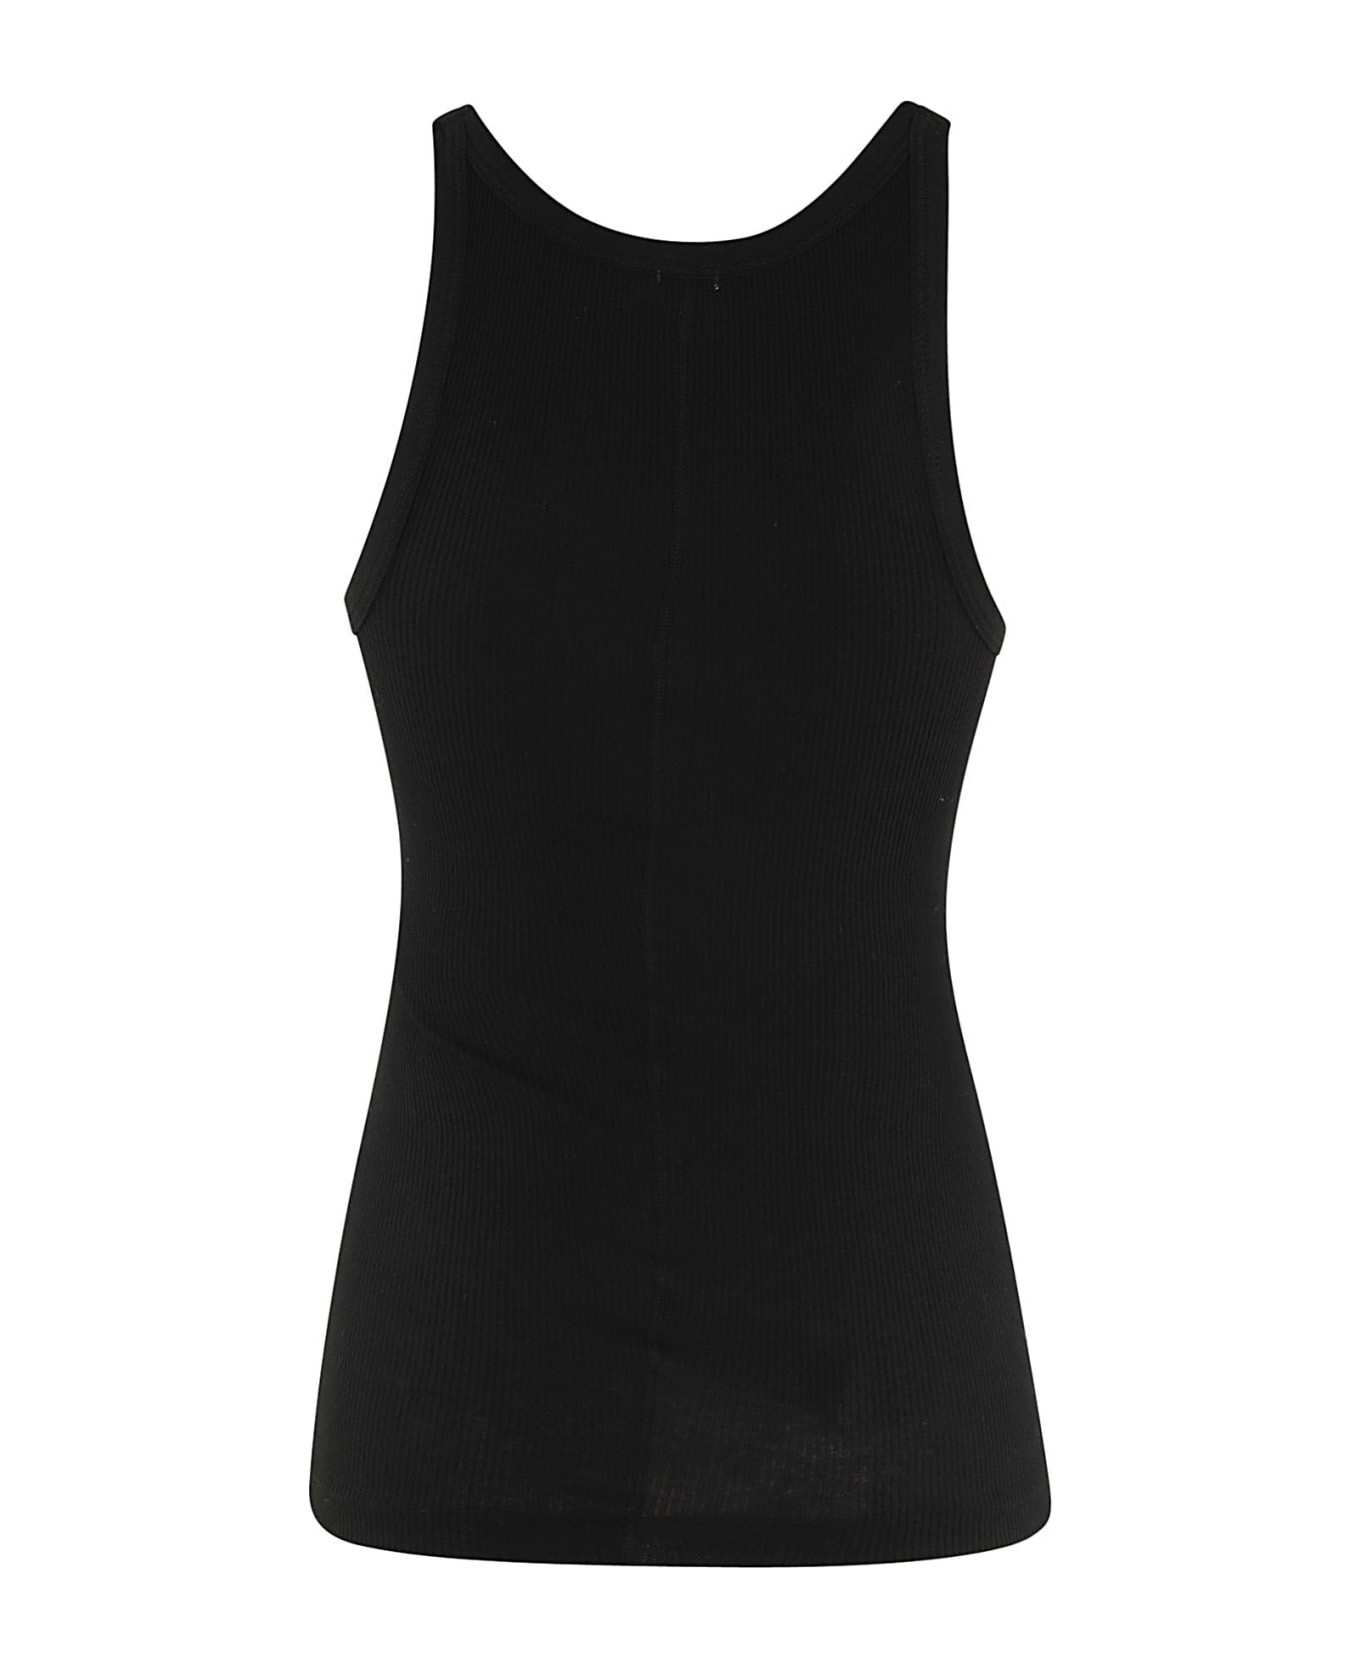 RE/DONE Ribbed Tank - Black